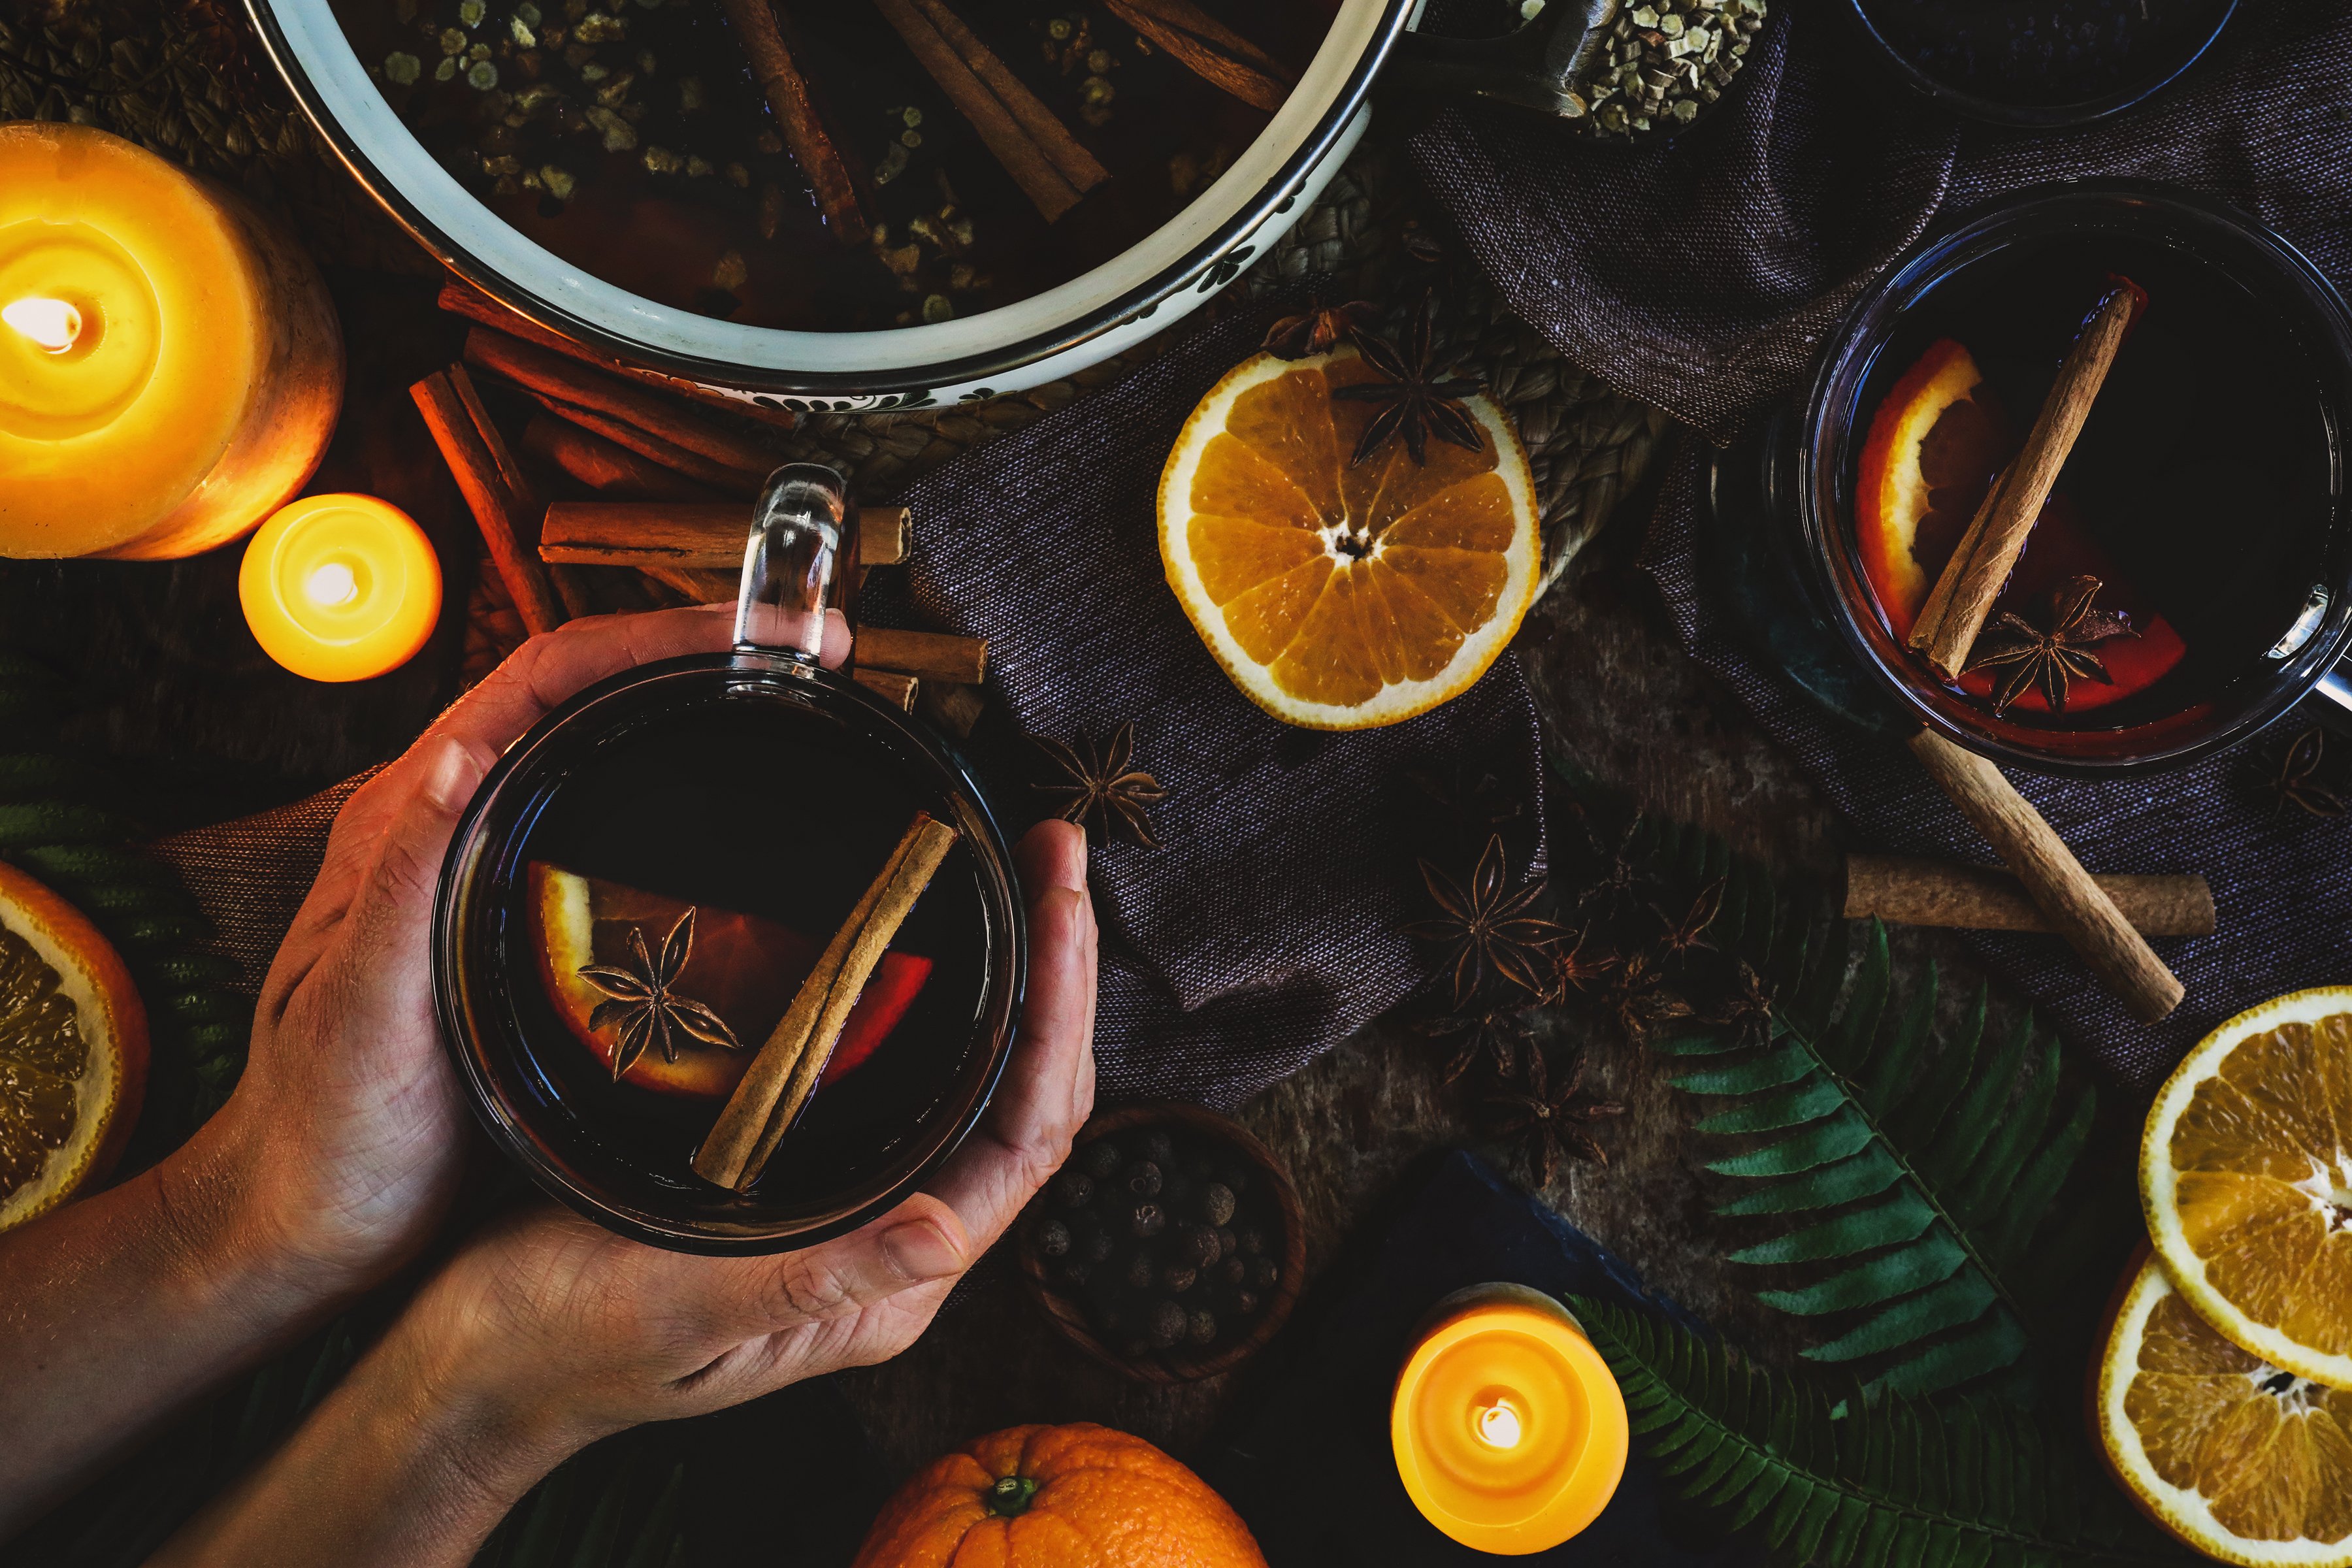 Hands are wrapped around a warm mug of mulled cider with lit candles and orange slices scattered on the table.